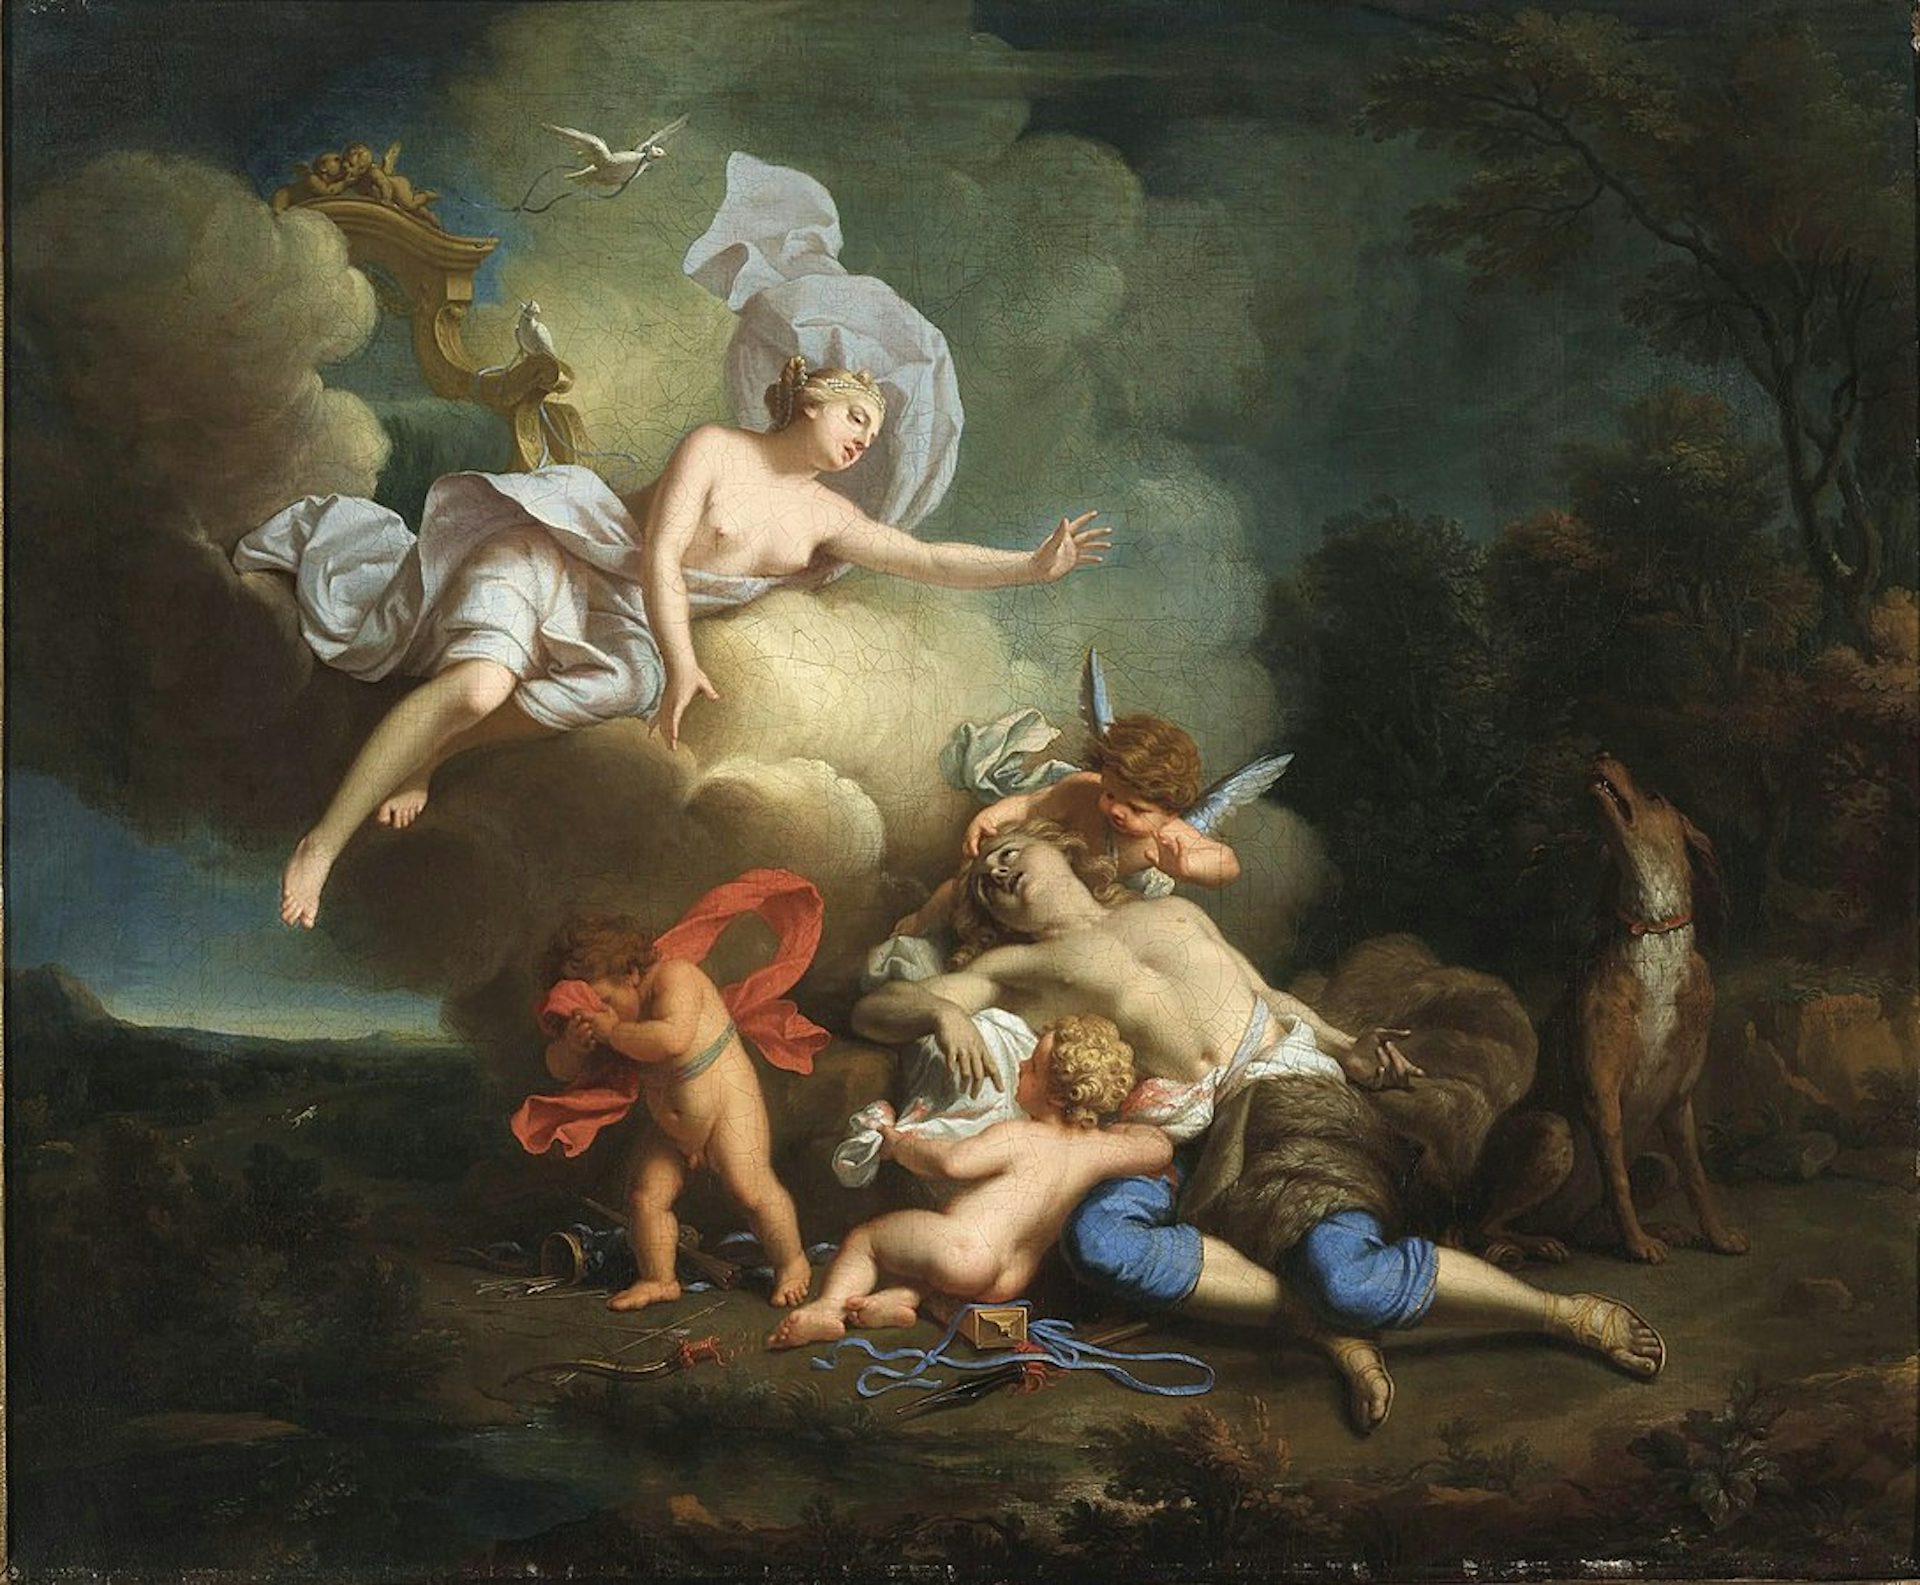 The Death of Adonis by Jean-Baptiste Nattier